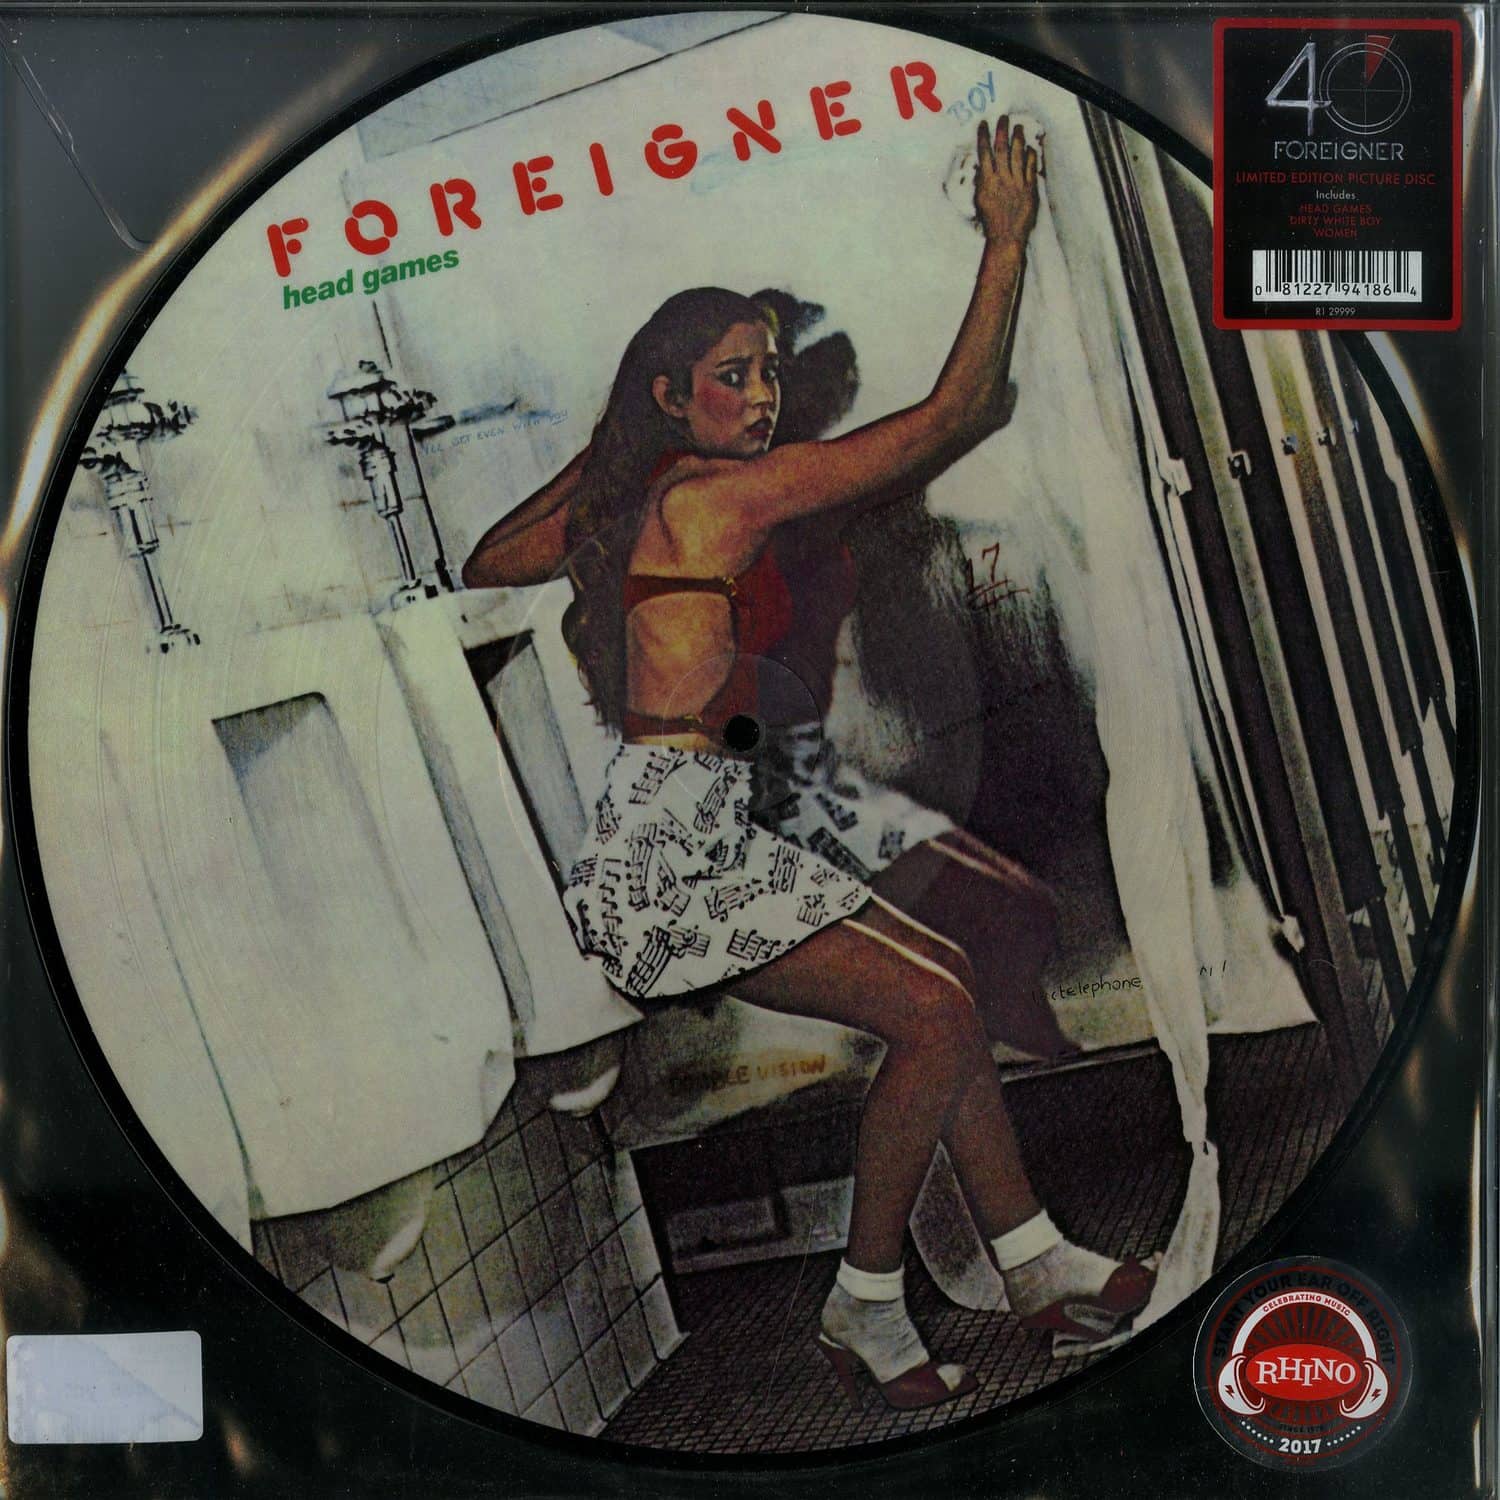 Foreigner - HEAD GAMES 